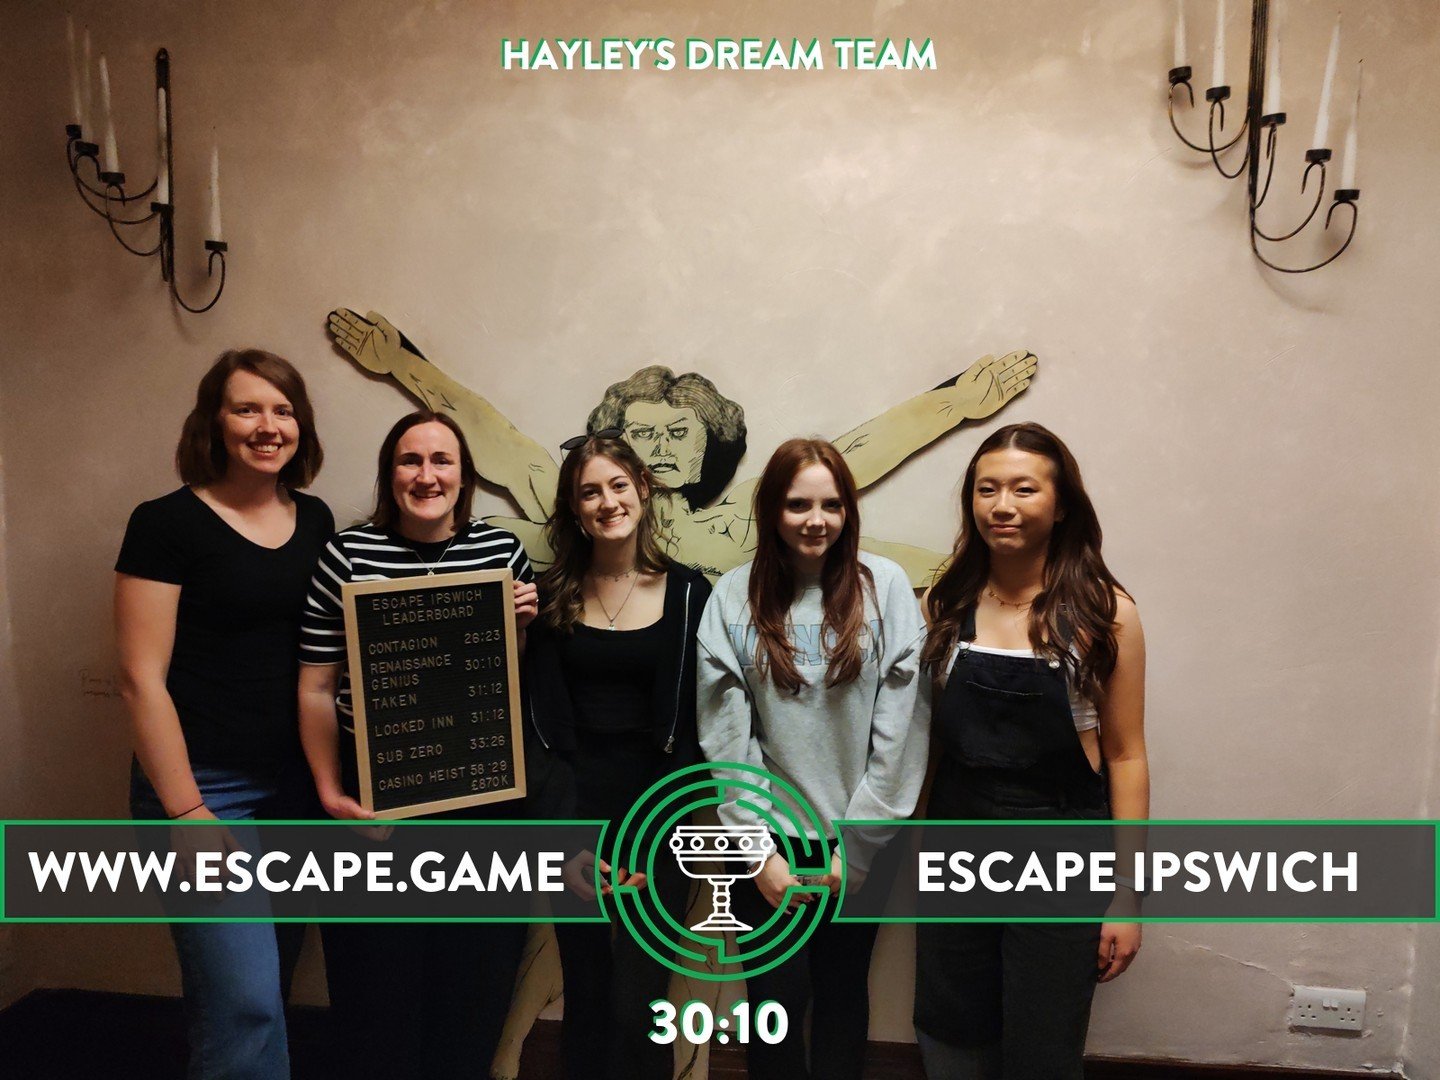 🤩 NEW RECORD ALERT!!🤩 

A huge well done to Hayley &amp; her dream team for smashing The Renaissance Genius! They completed it in just 30 minutes and 10 seconds with 1 very cryptic clue 👌 

Good job Hayley, we are so impressed with you all. You sm